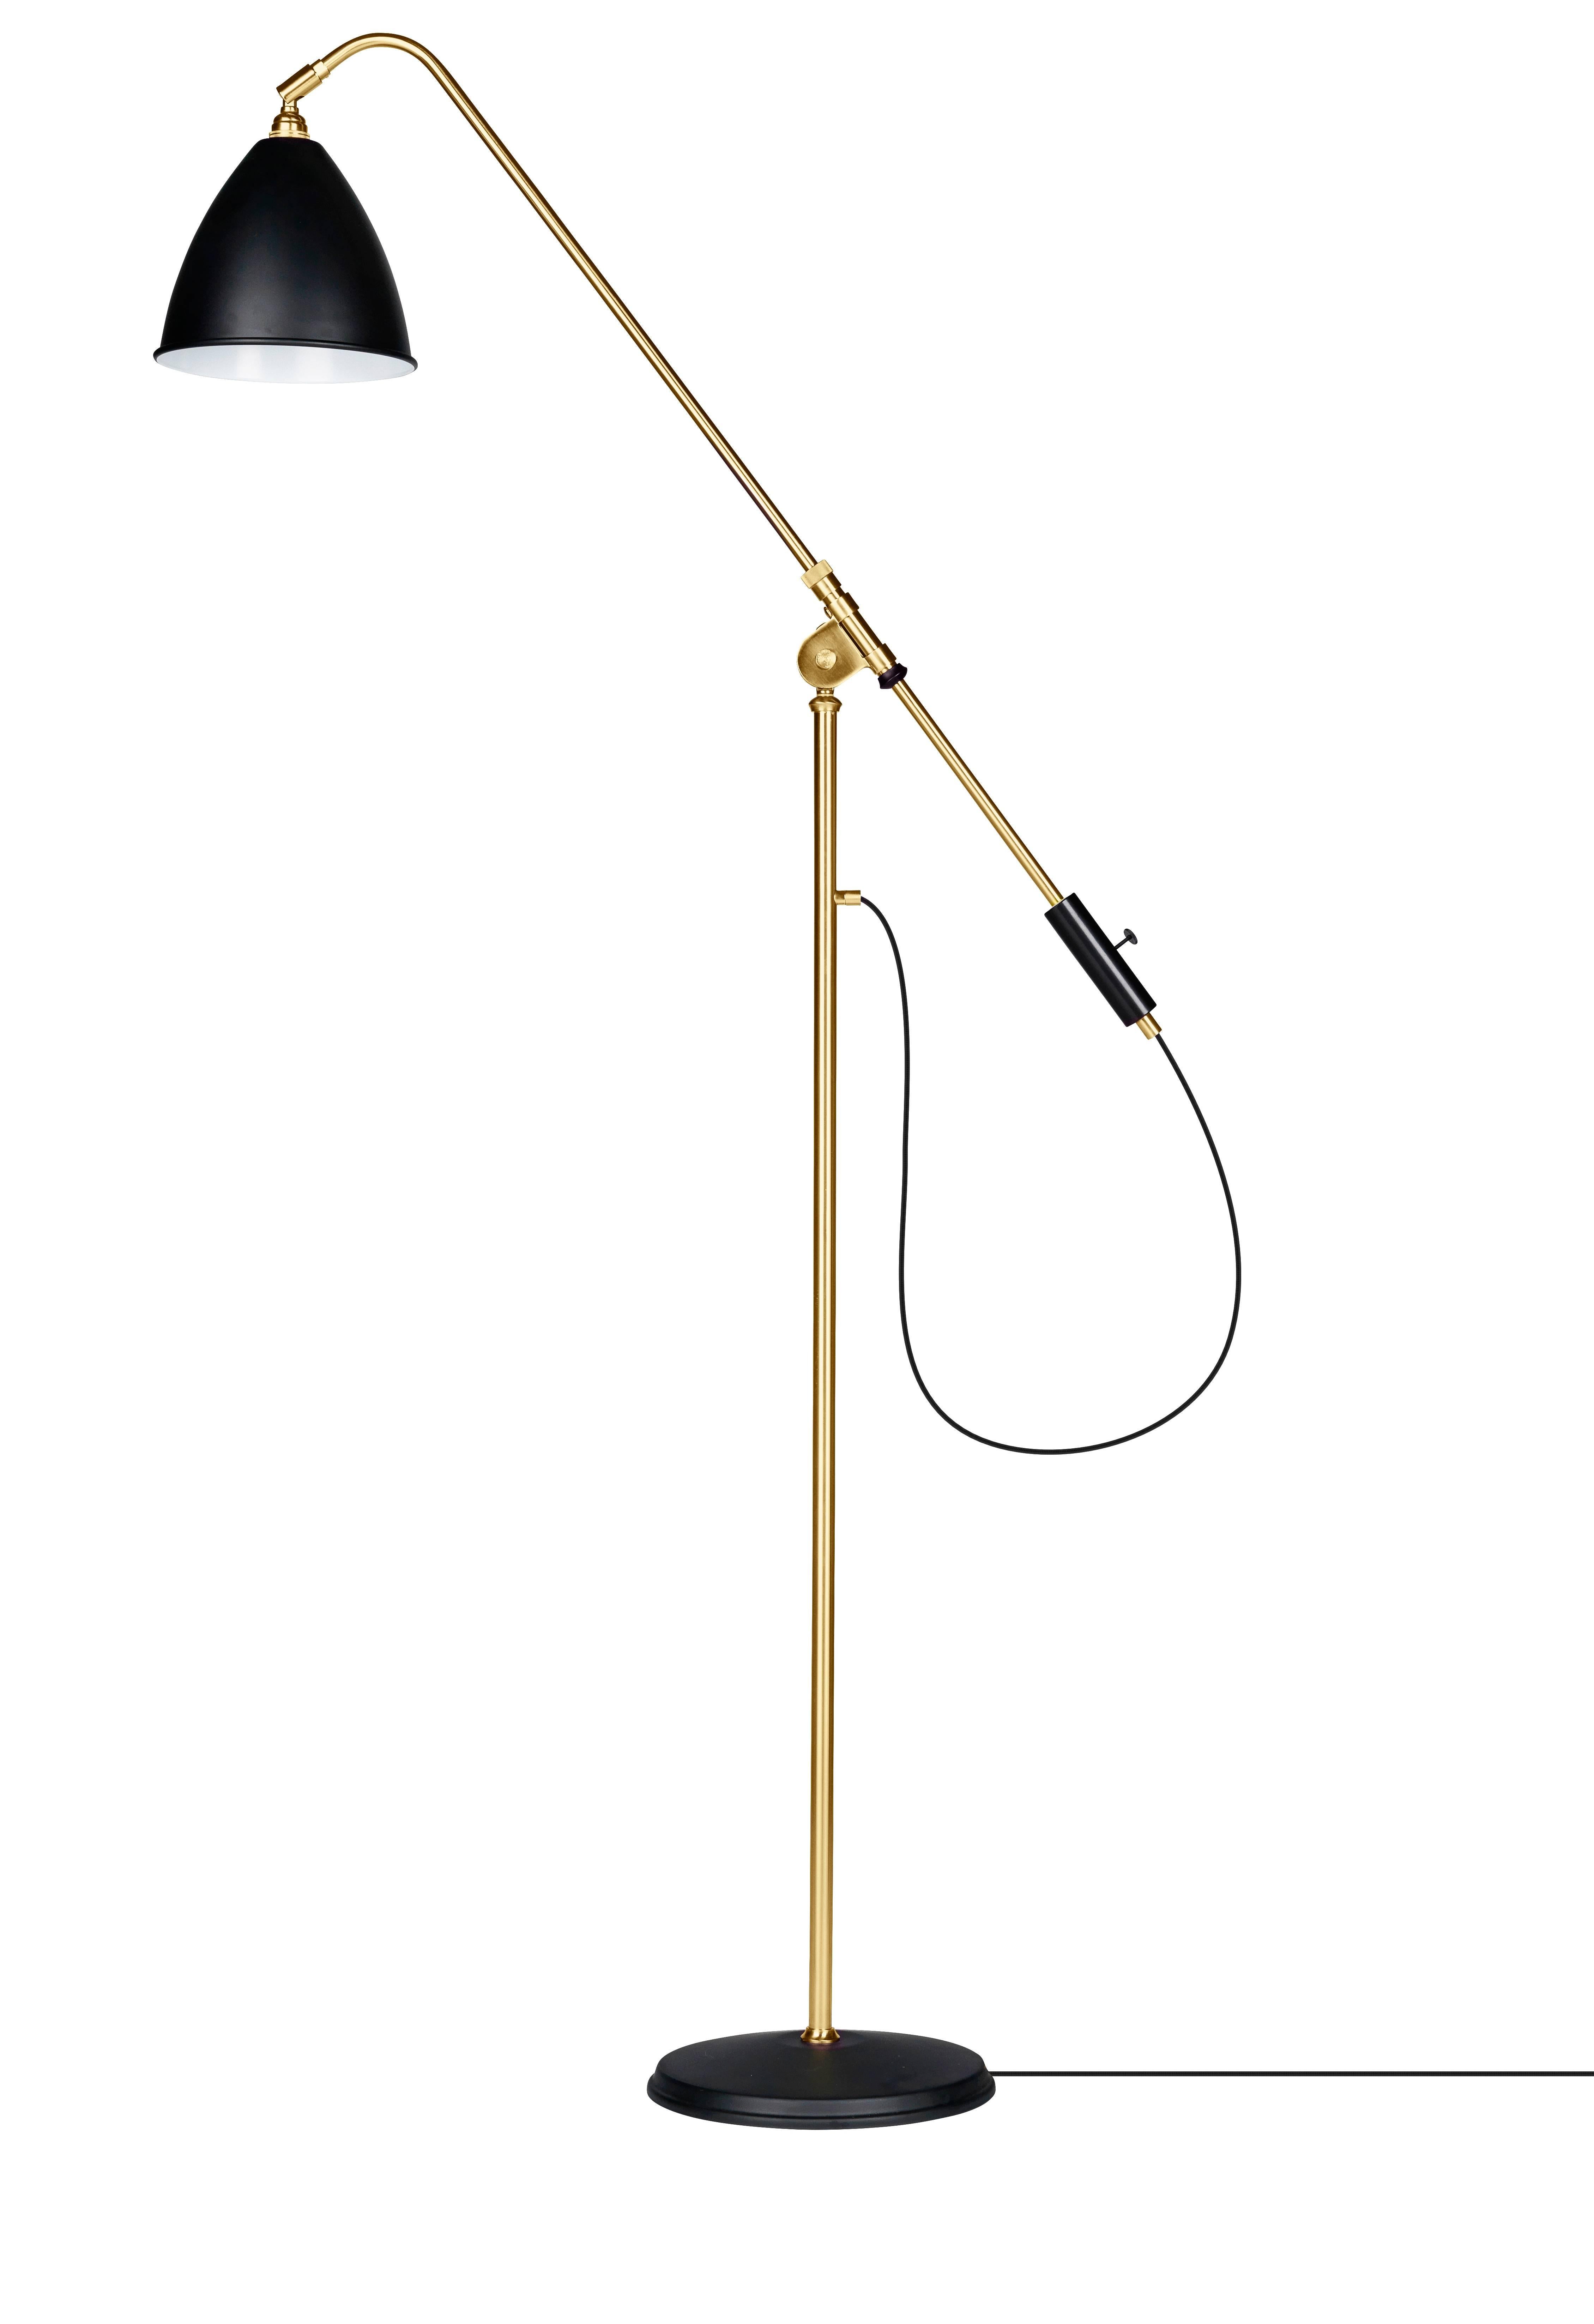 Contemporary brass floor lamp, Bauhaus style

Dimensions: 120 x 105 x 15 cm
Material: Brass
Robert Dudley best
Produced by Gubi in Denmark

The multi-light pendant embraces the golden era of Danish design with its characteristic shape of two